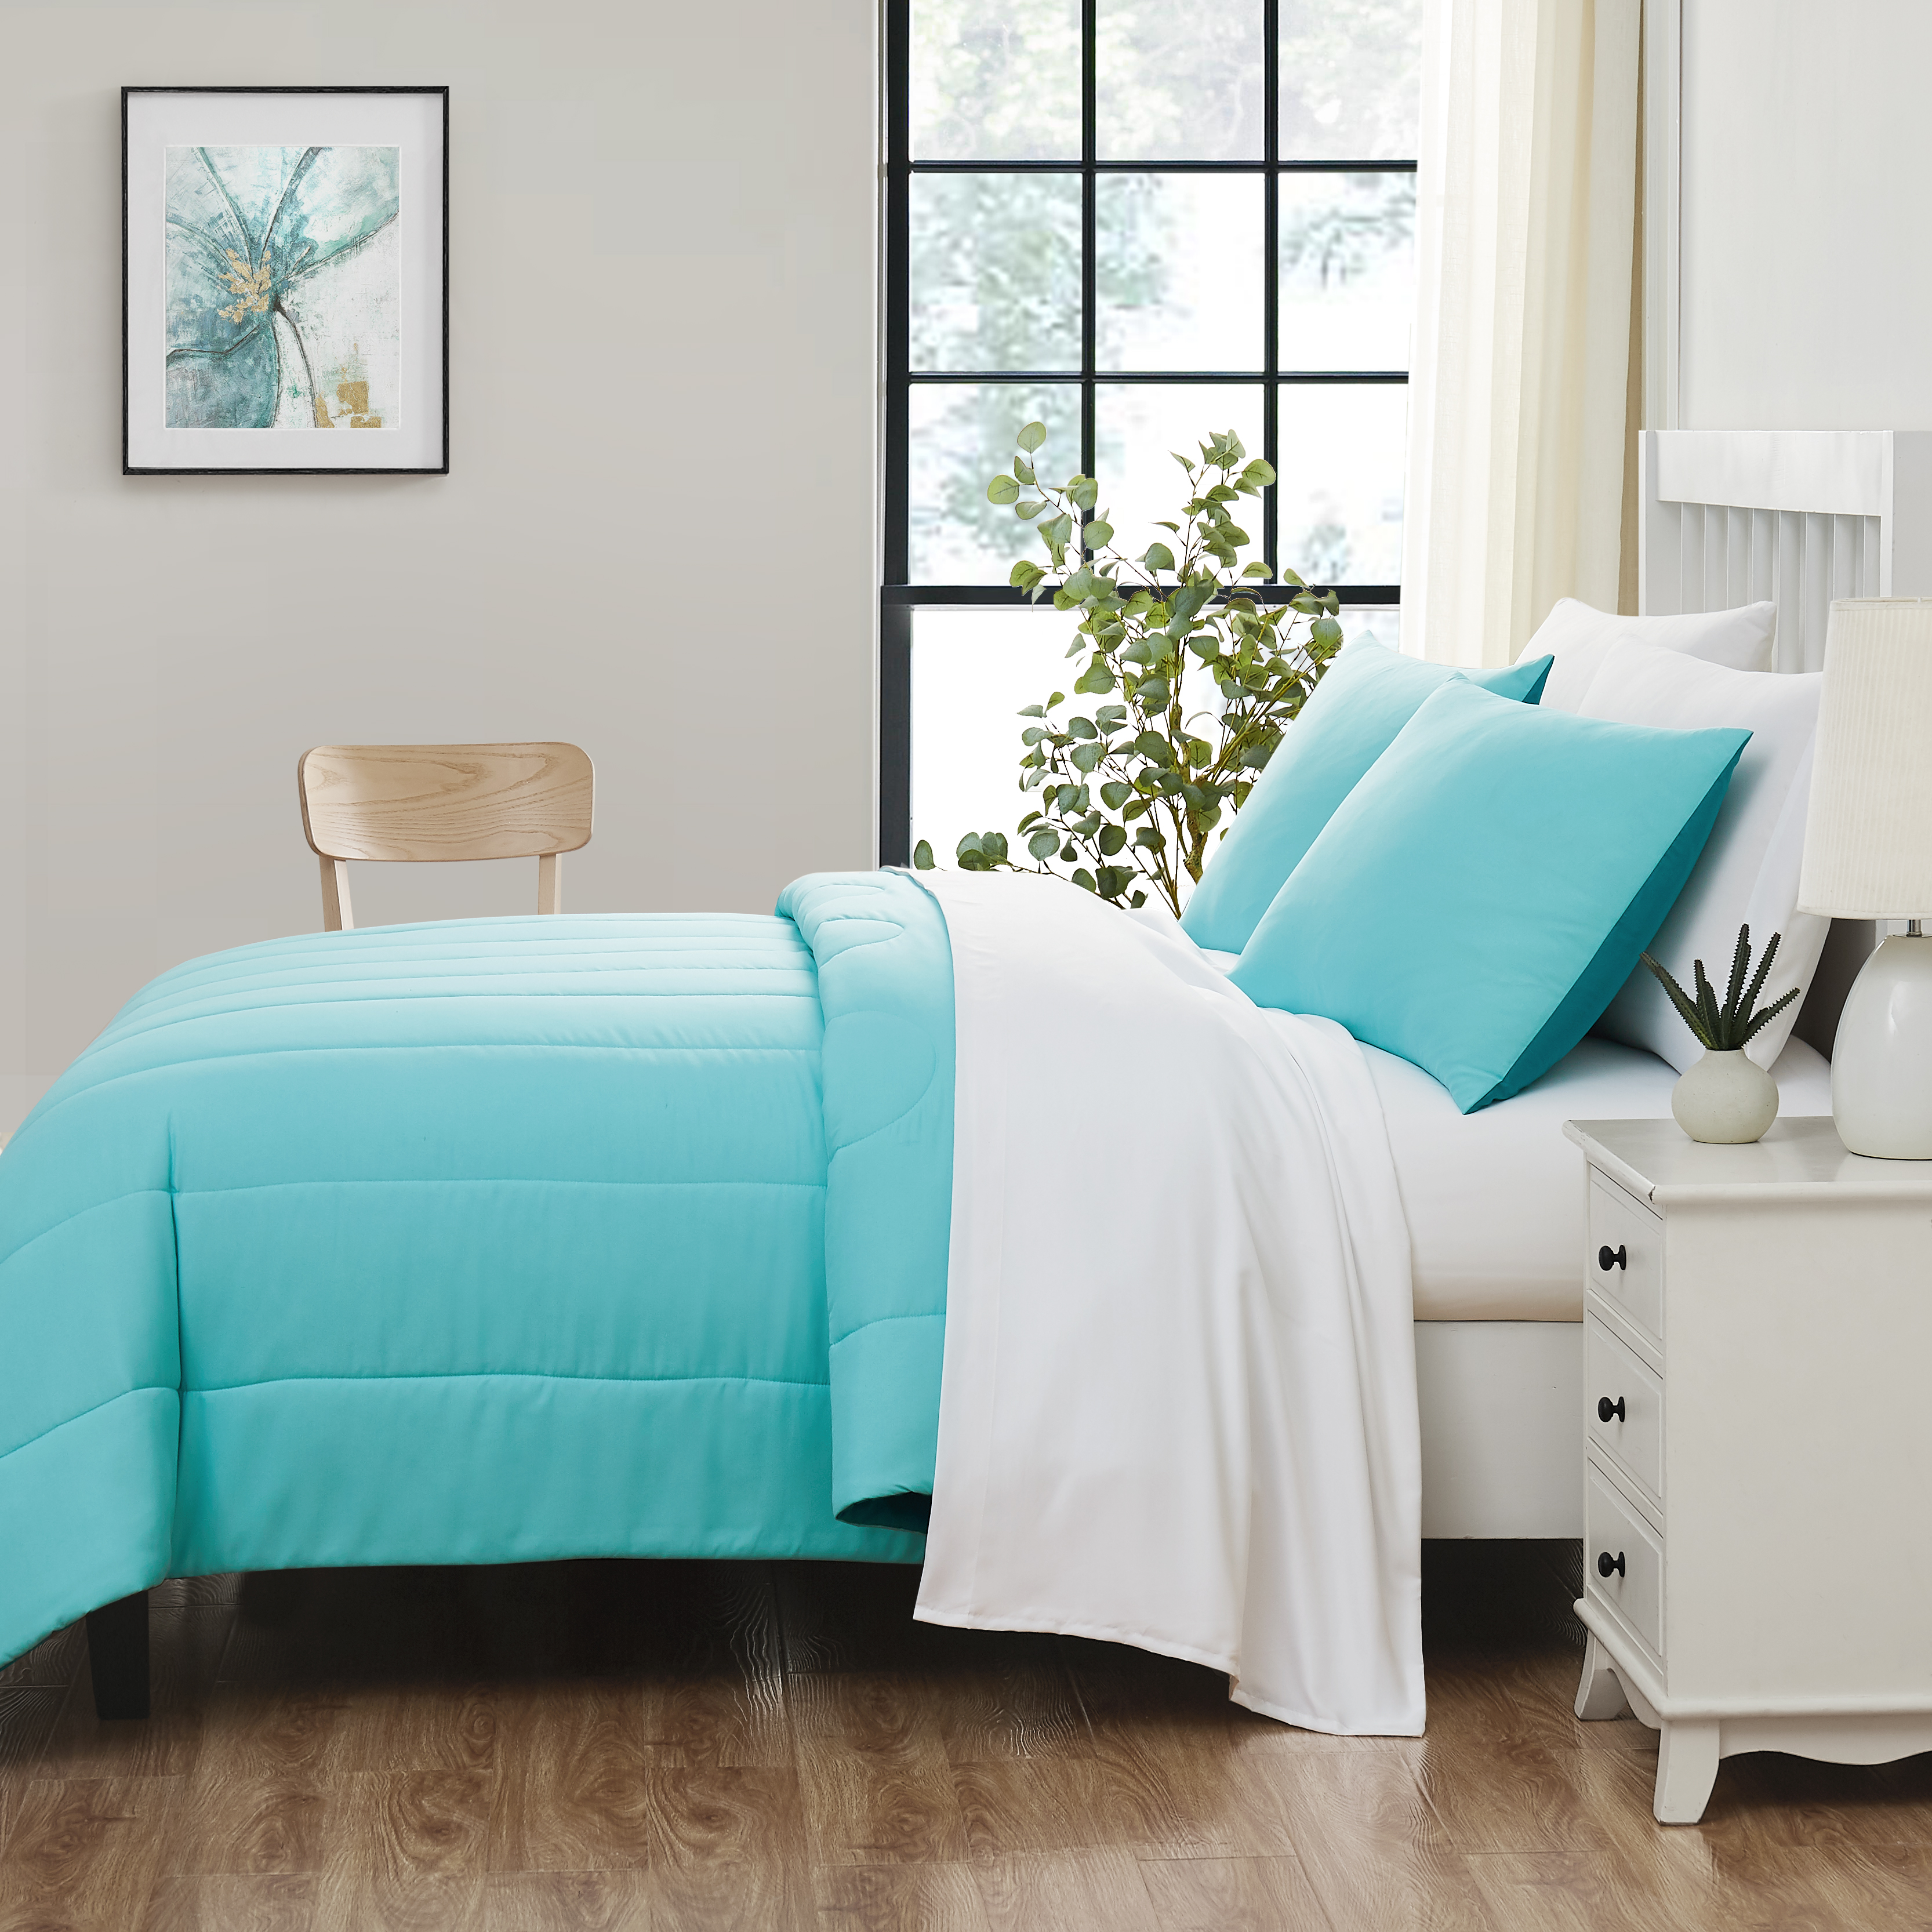 Mainstays Teal Reversible 7-Piece Bed in a Bag Comforter Set with Sheets, Queen - image 4 of 8